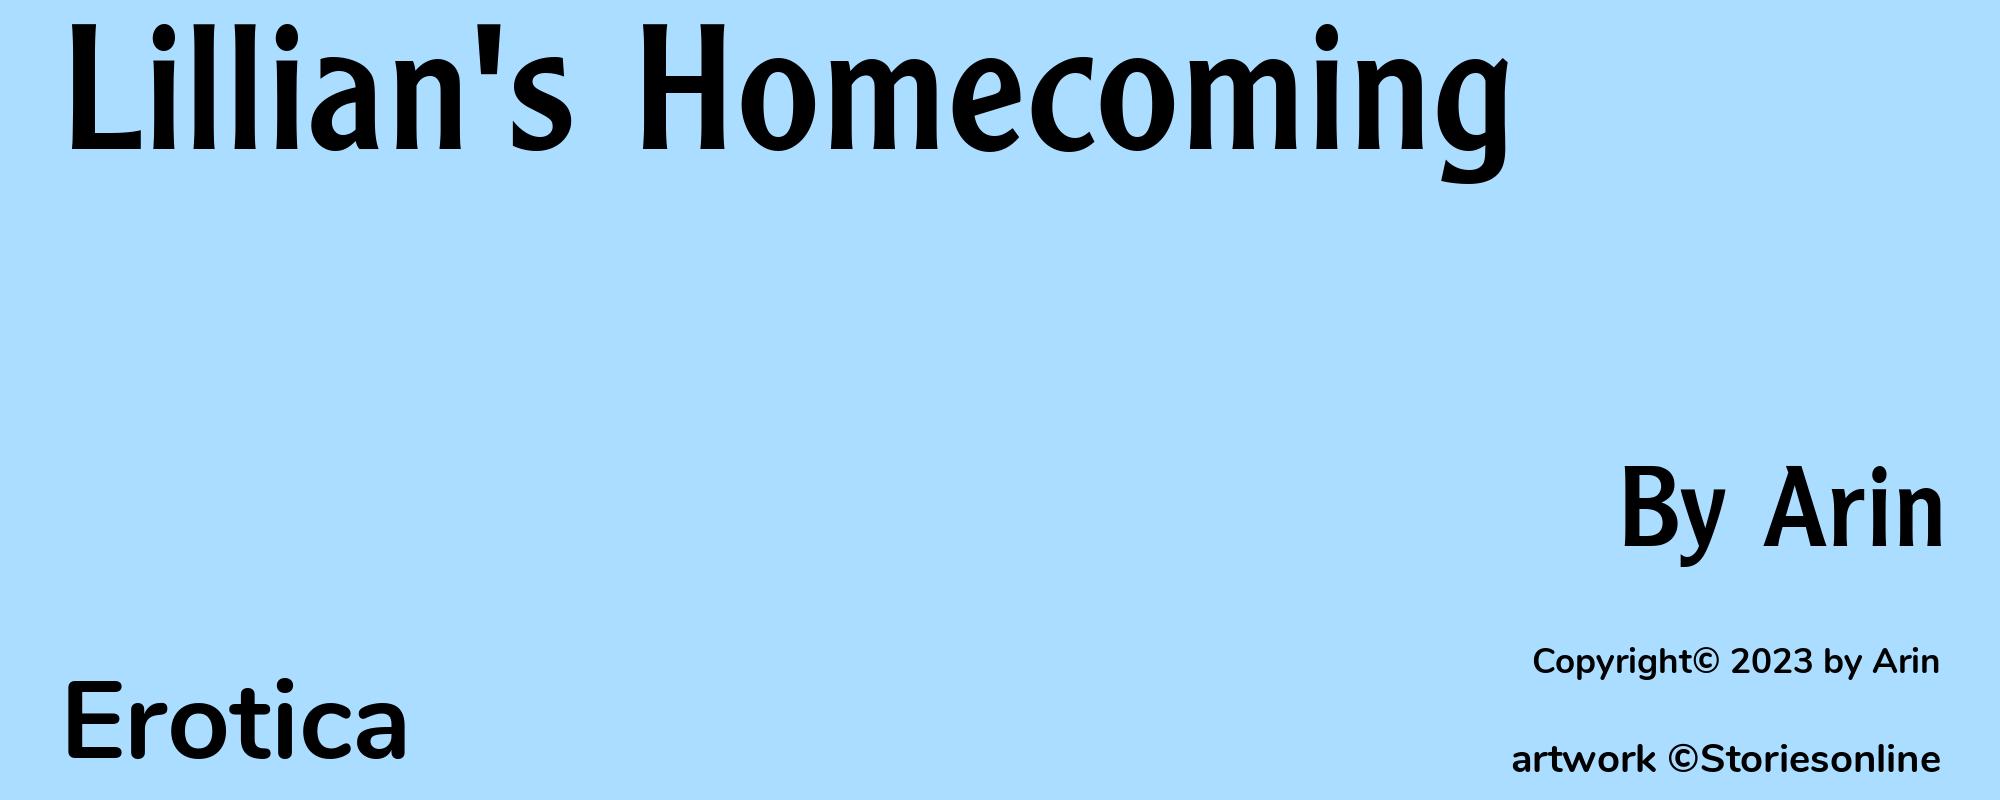 Lillian's Homecoming - Cover